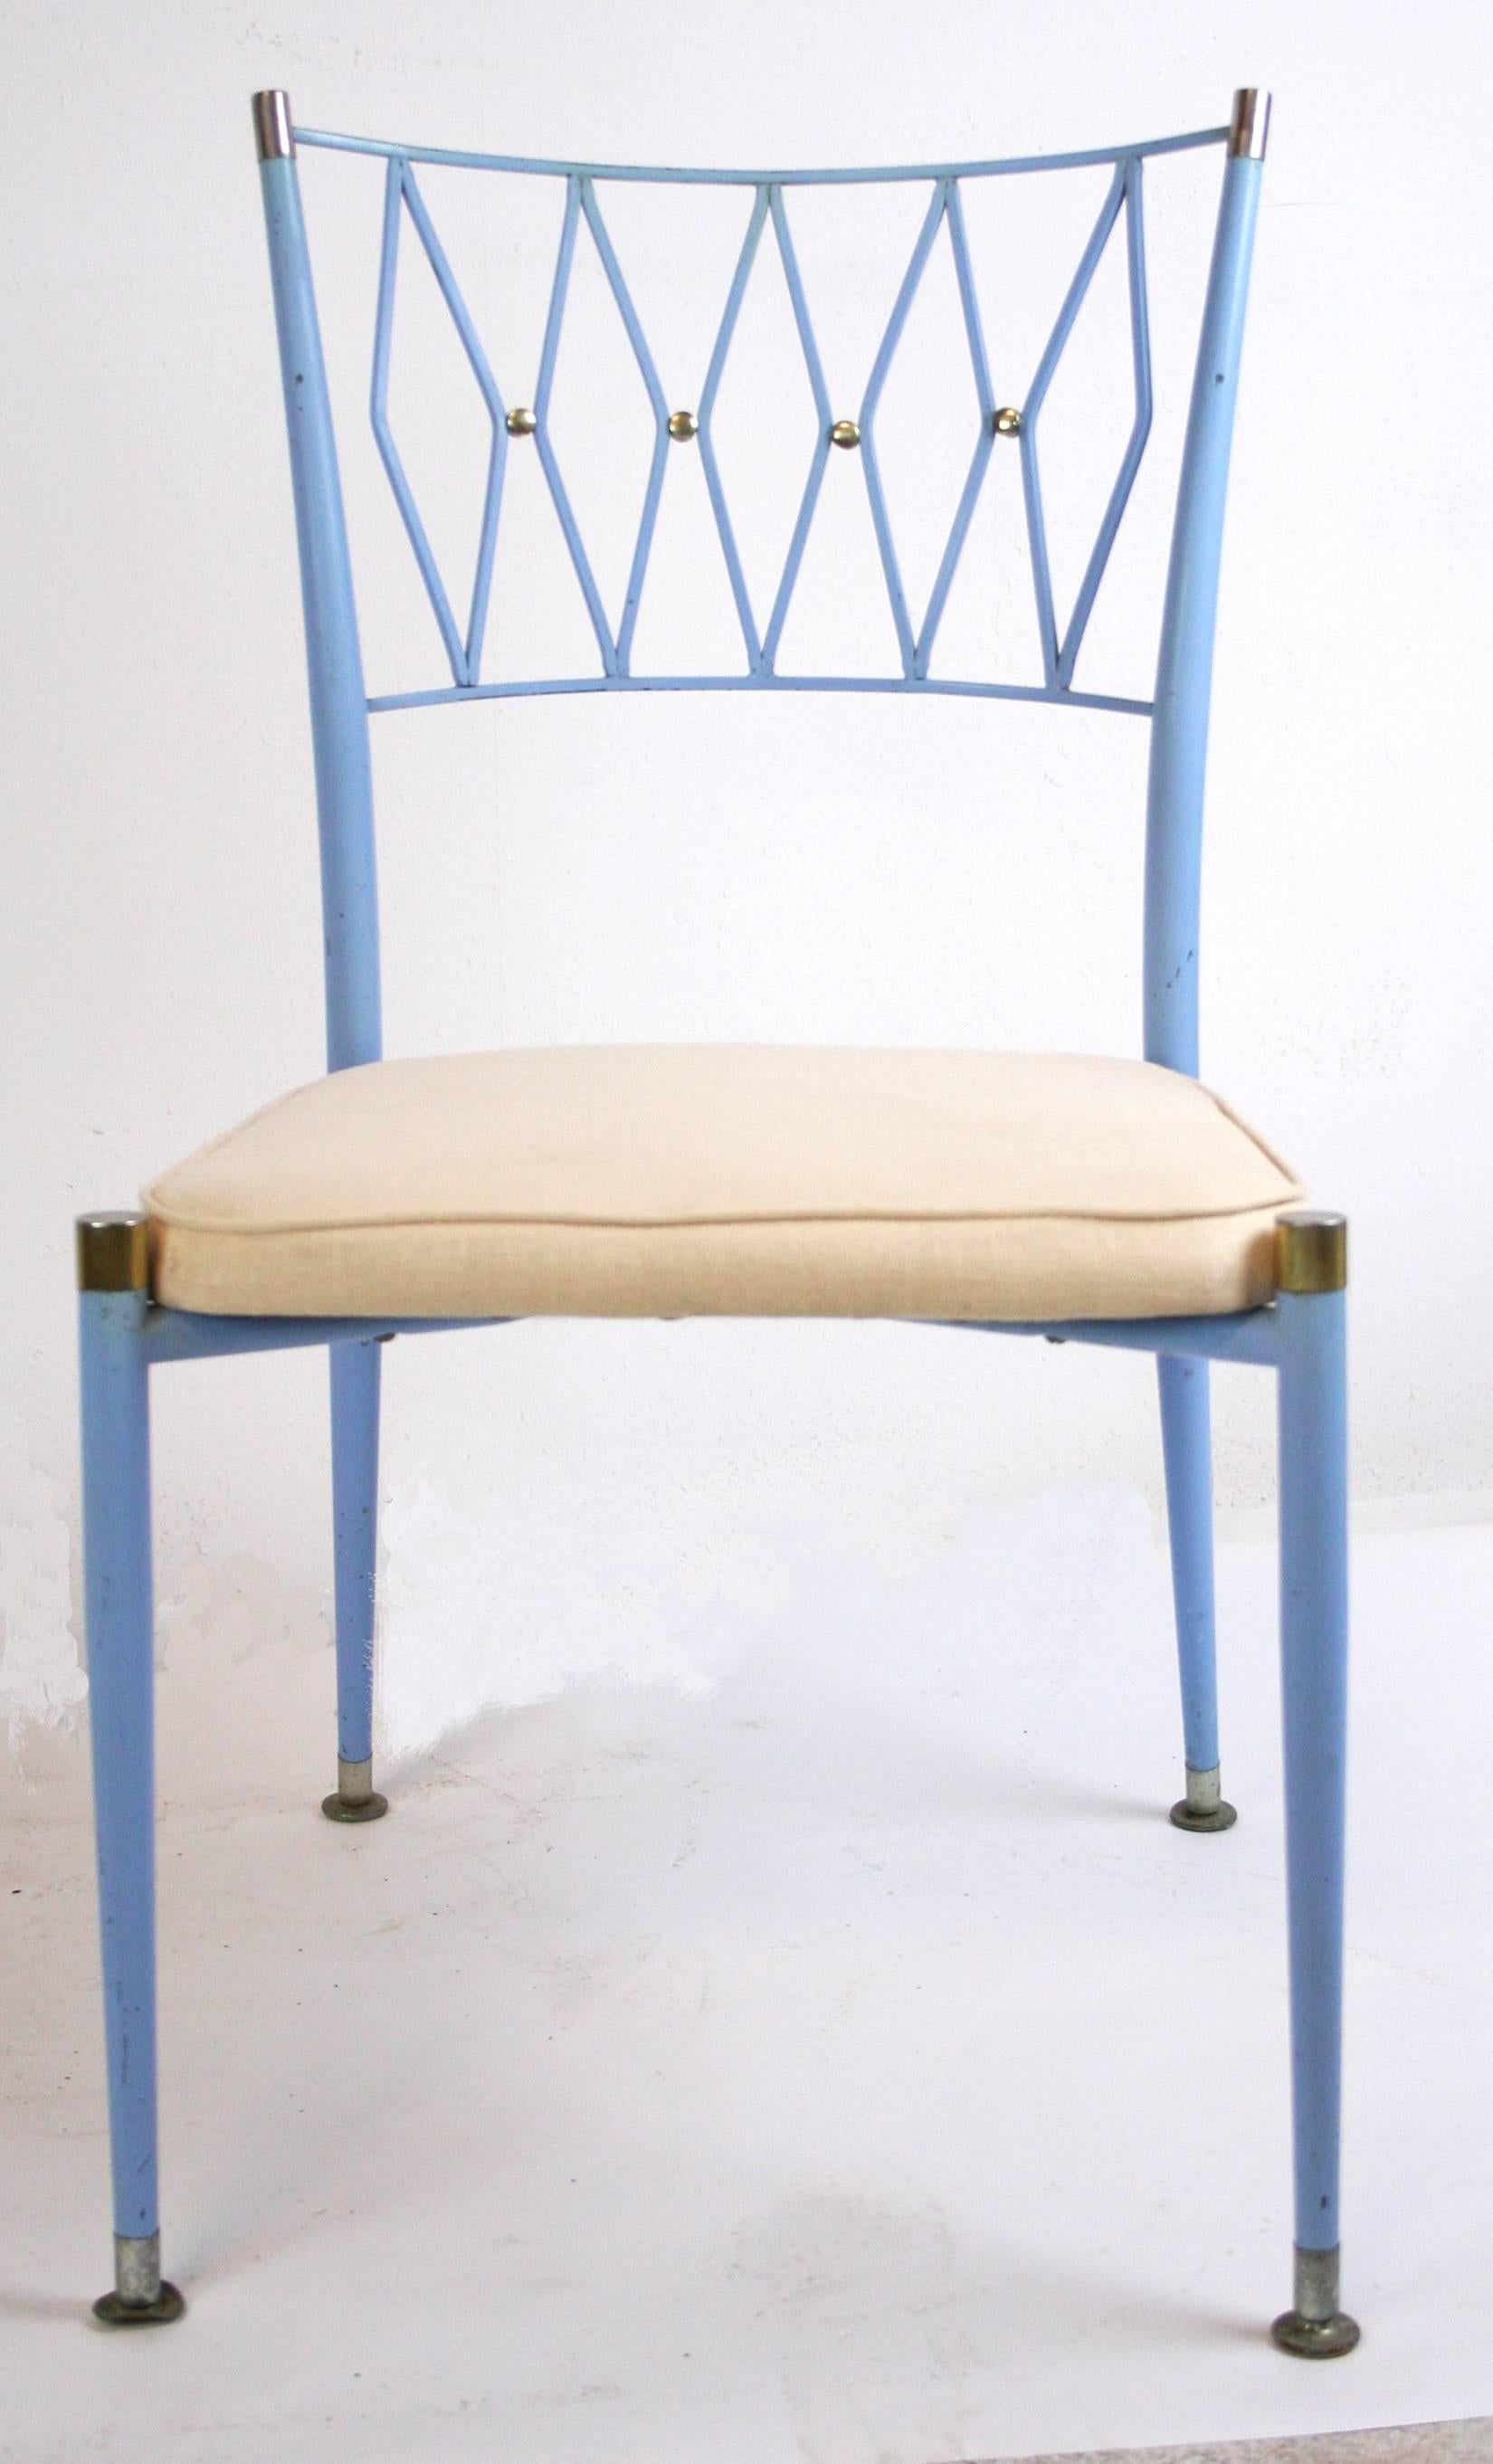 A chic set of four dining chairs in painted metal with brass accents in the style of Colette Gueden or Maison Jansen. Original French blue paint and upholstered seats. Elegant stylized lattice back splat with brass "buttons" and chrome